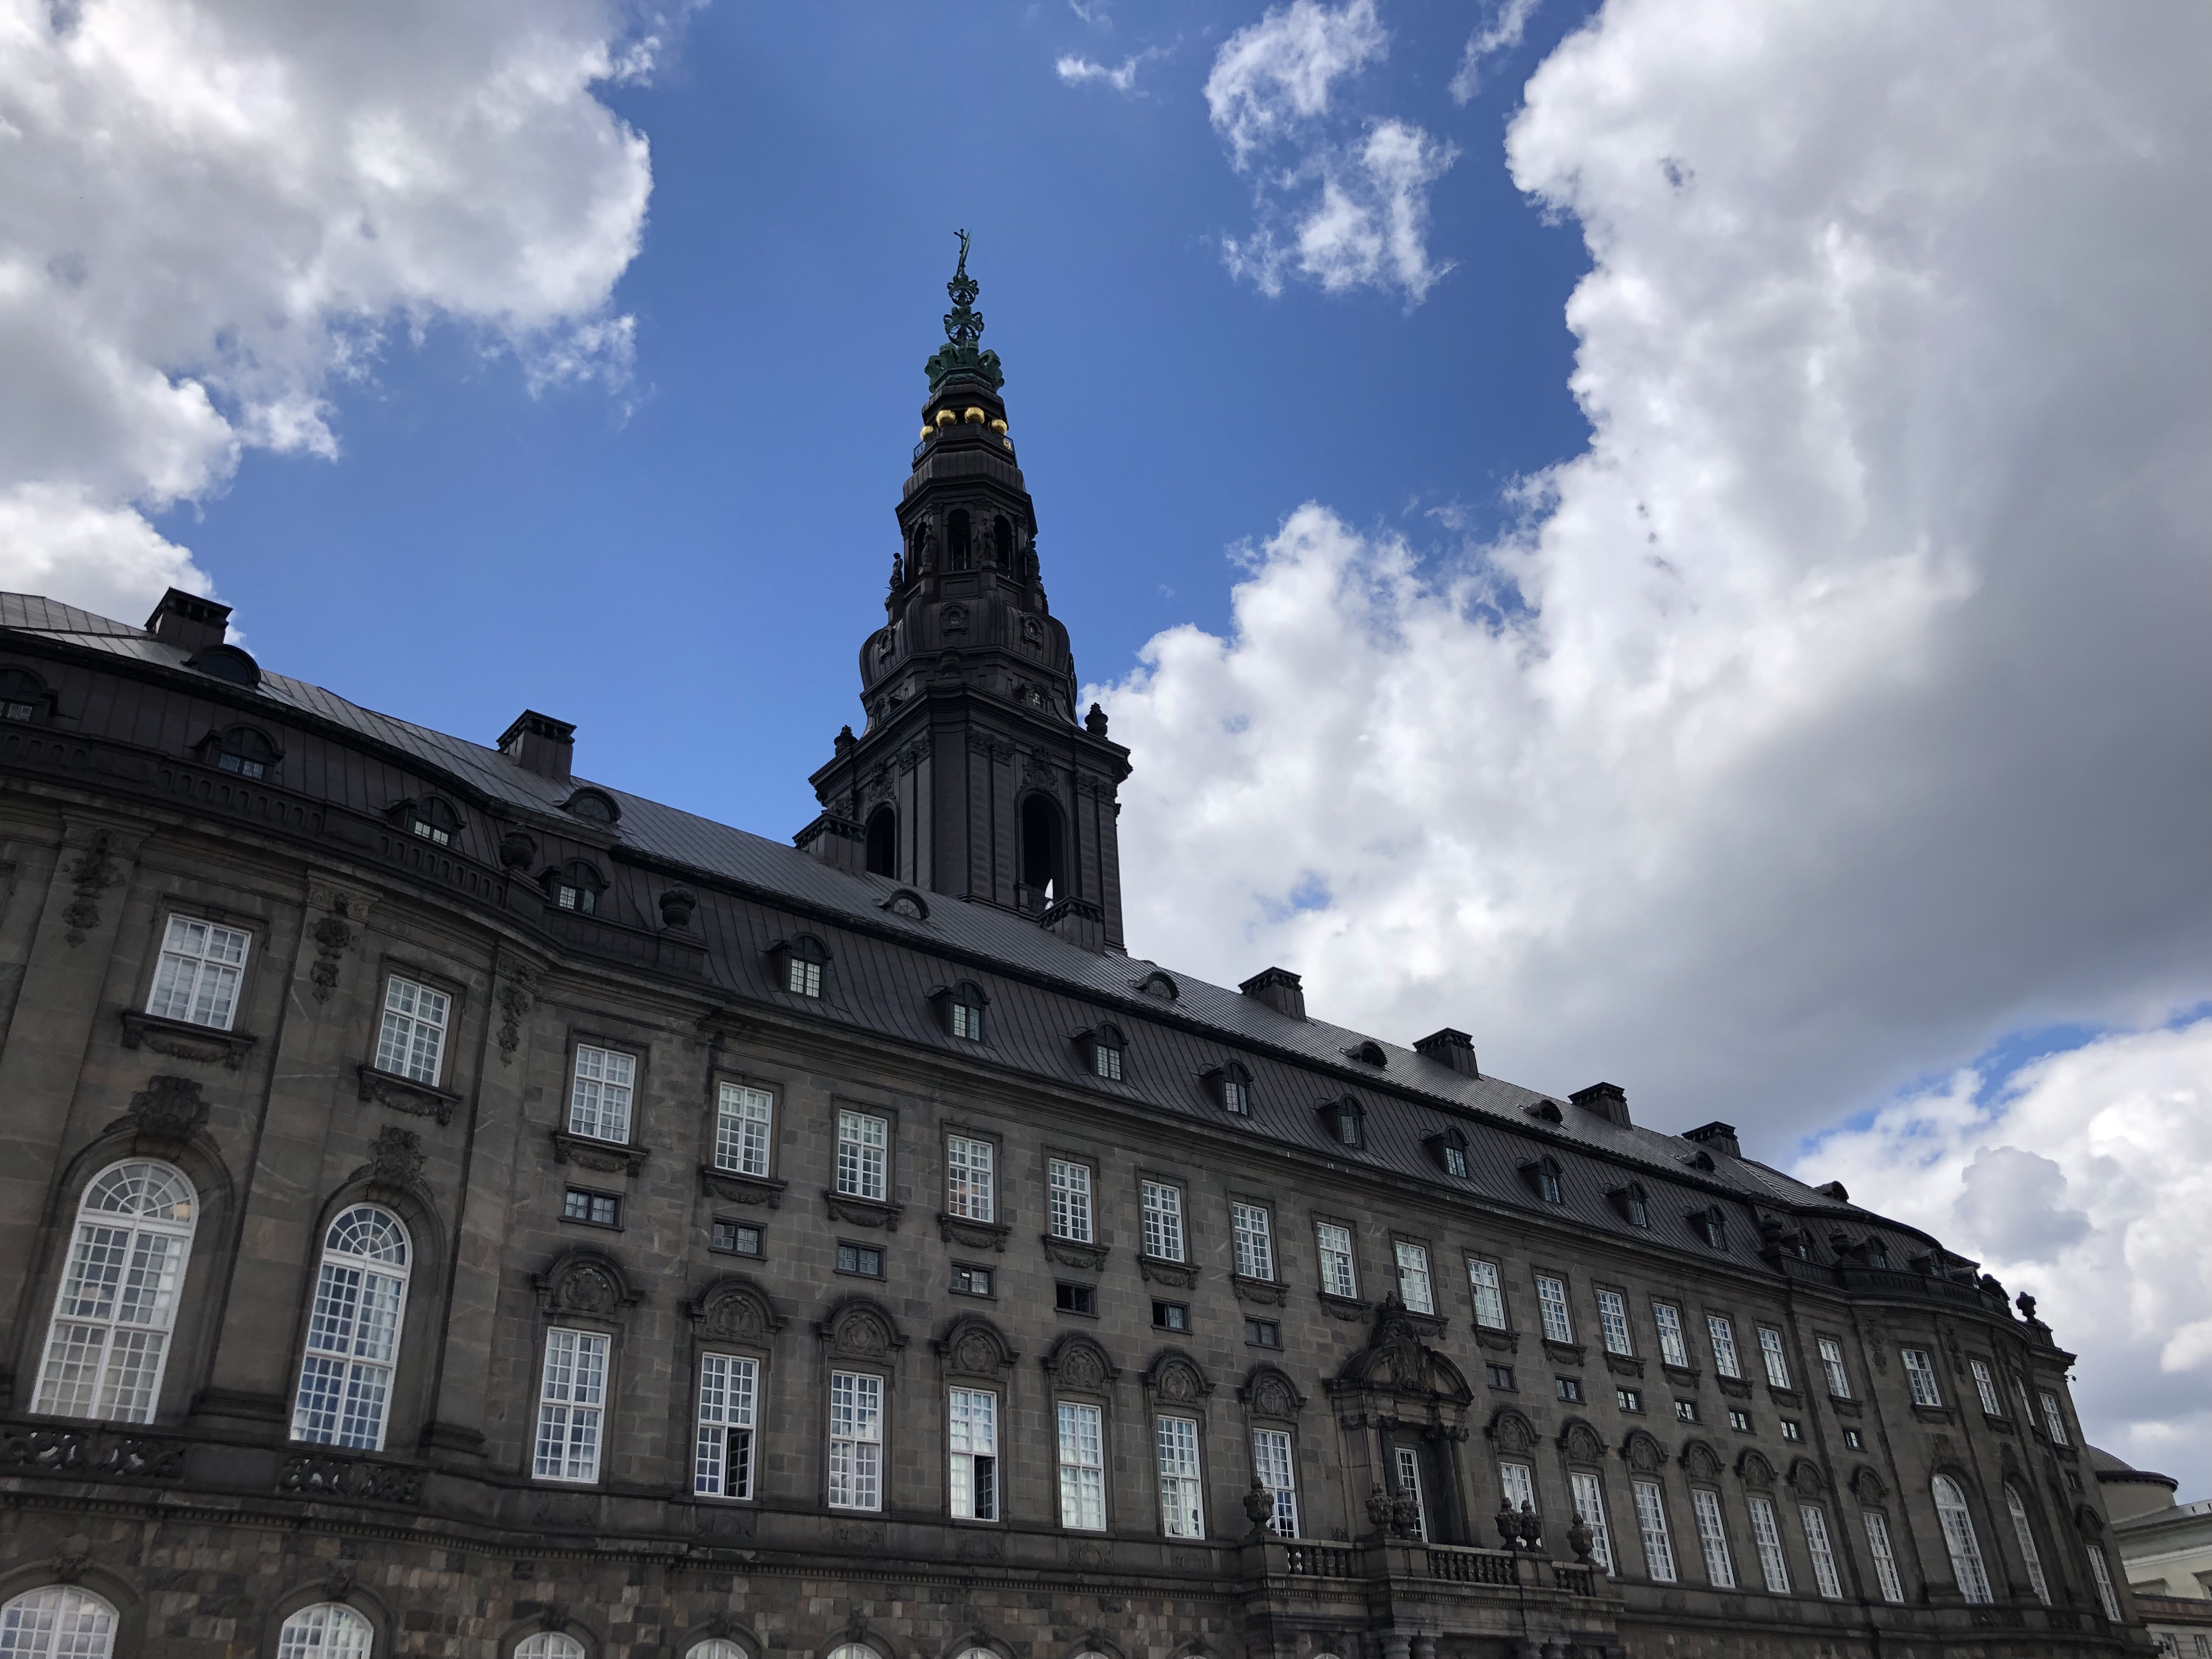 Some kind of statehouse that was restored and given an aged look to convey power and strength in Copenhagen.